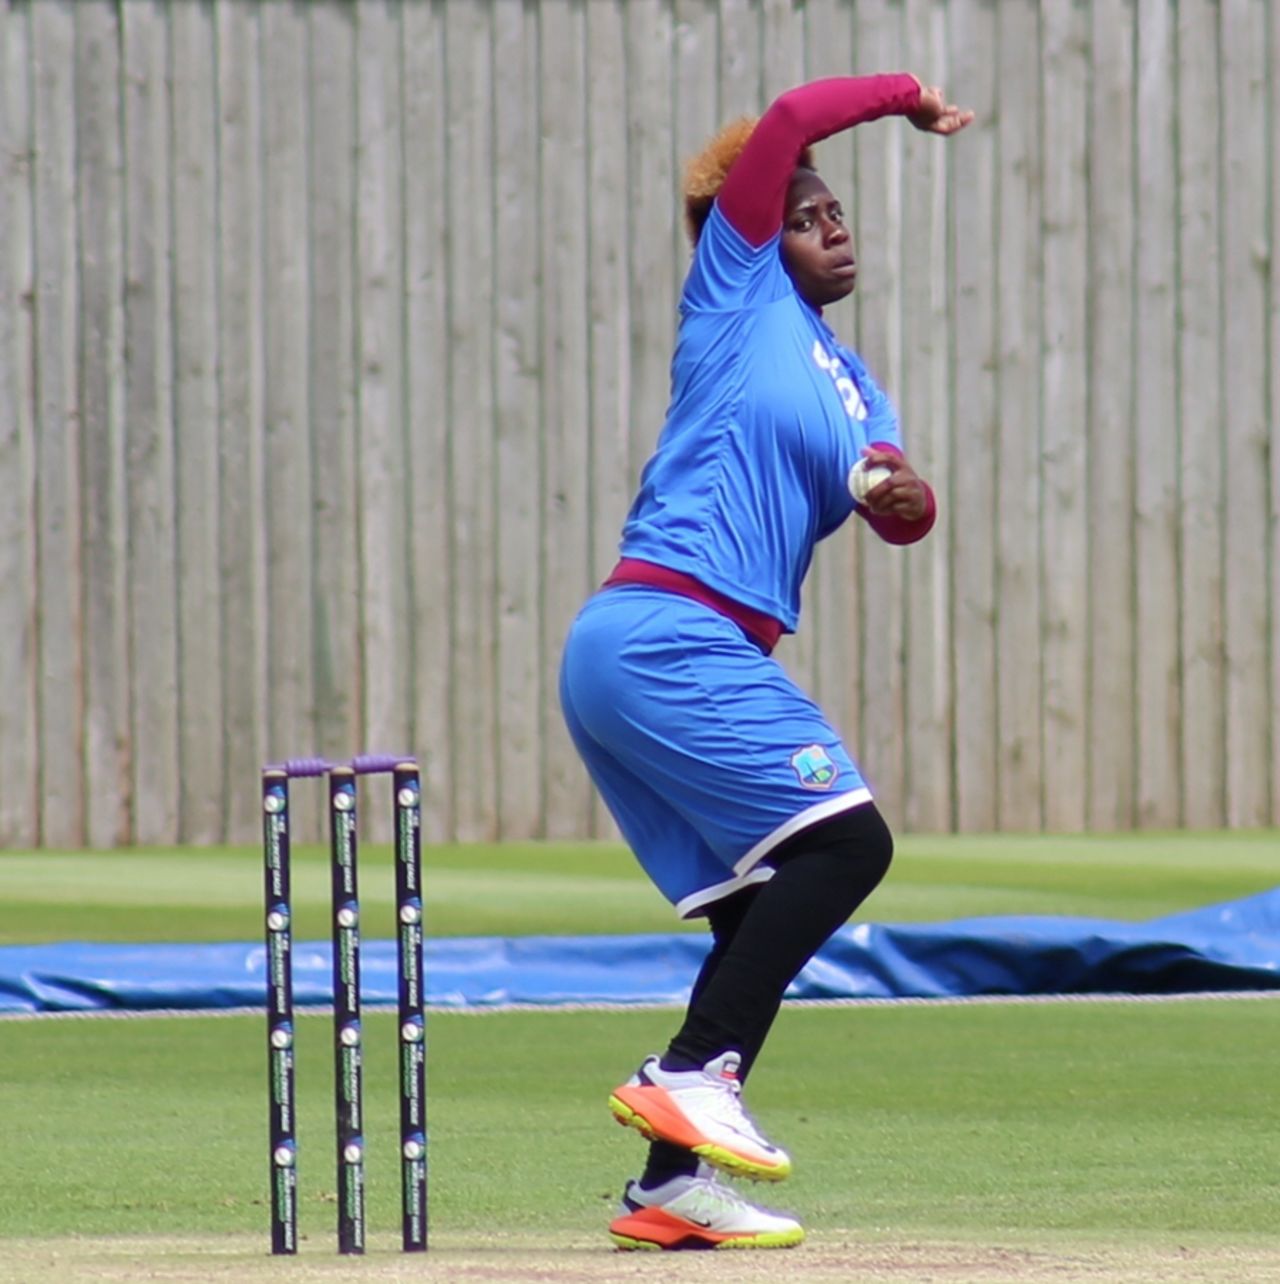 Shanel Daley hits her delivery stride, Women's World Cup 2017, Hampshire, June 4, 2017